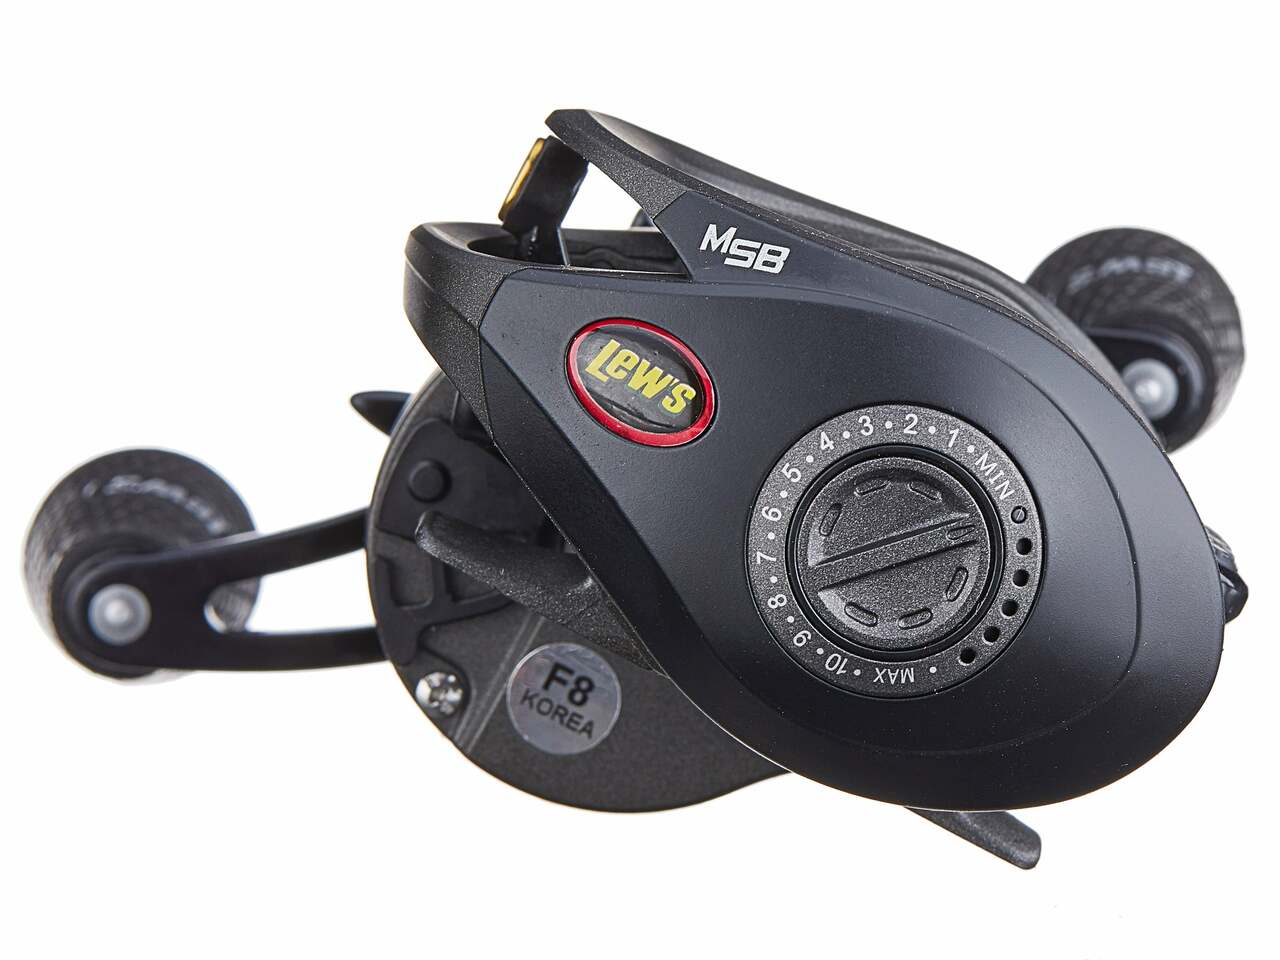 Lew's SuperDuty 300 Casting Reel